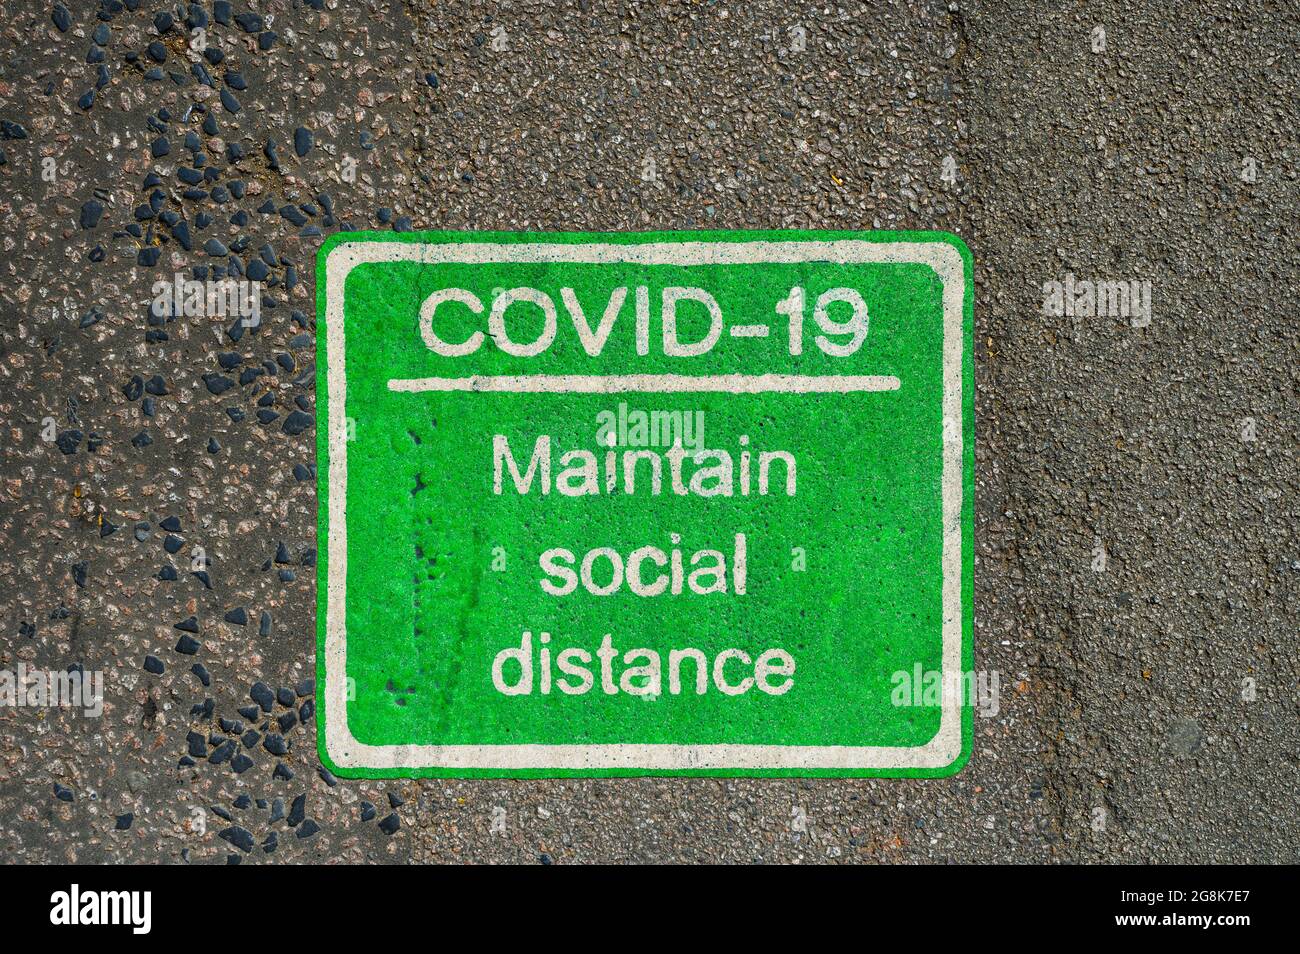 Green COVID-19 social distancing sign painted on pavement or road. Stock Photo